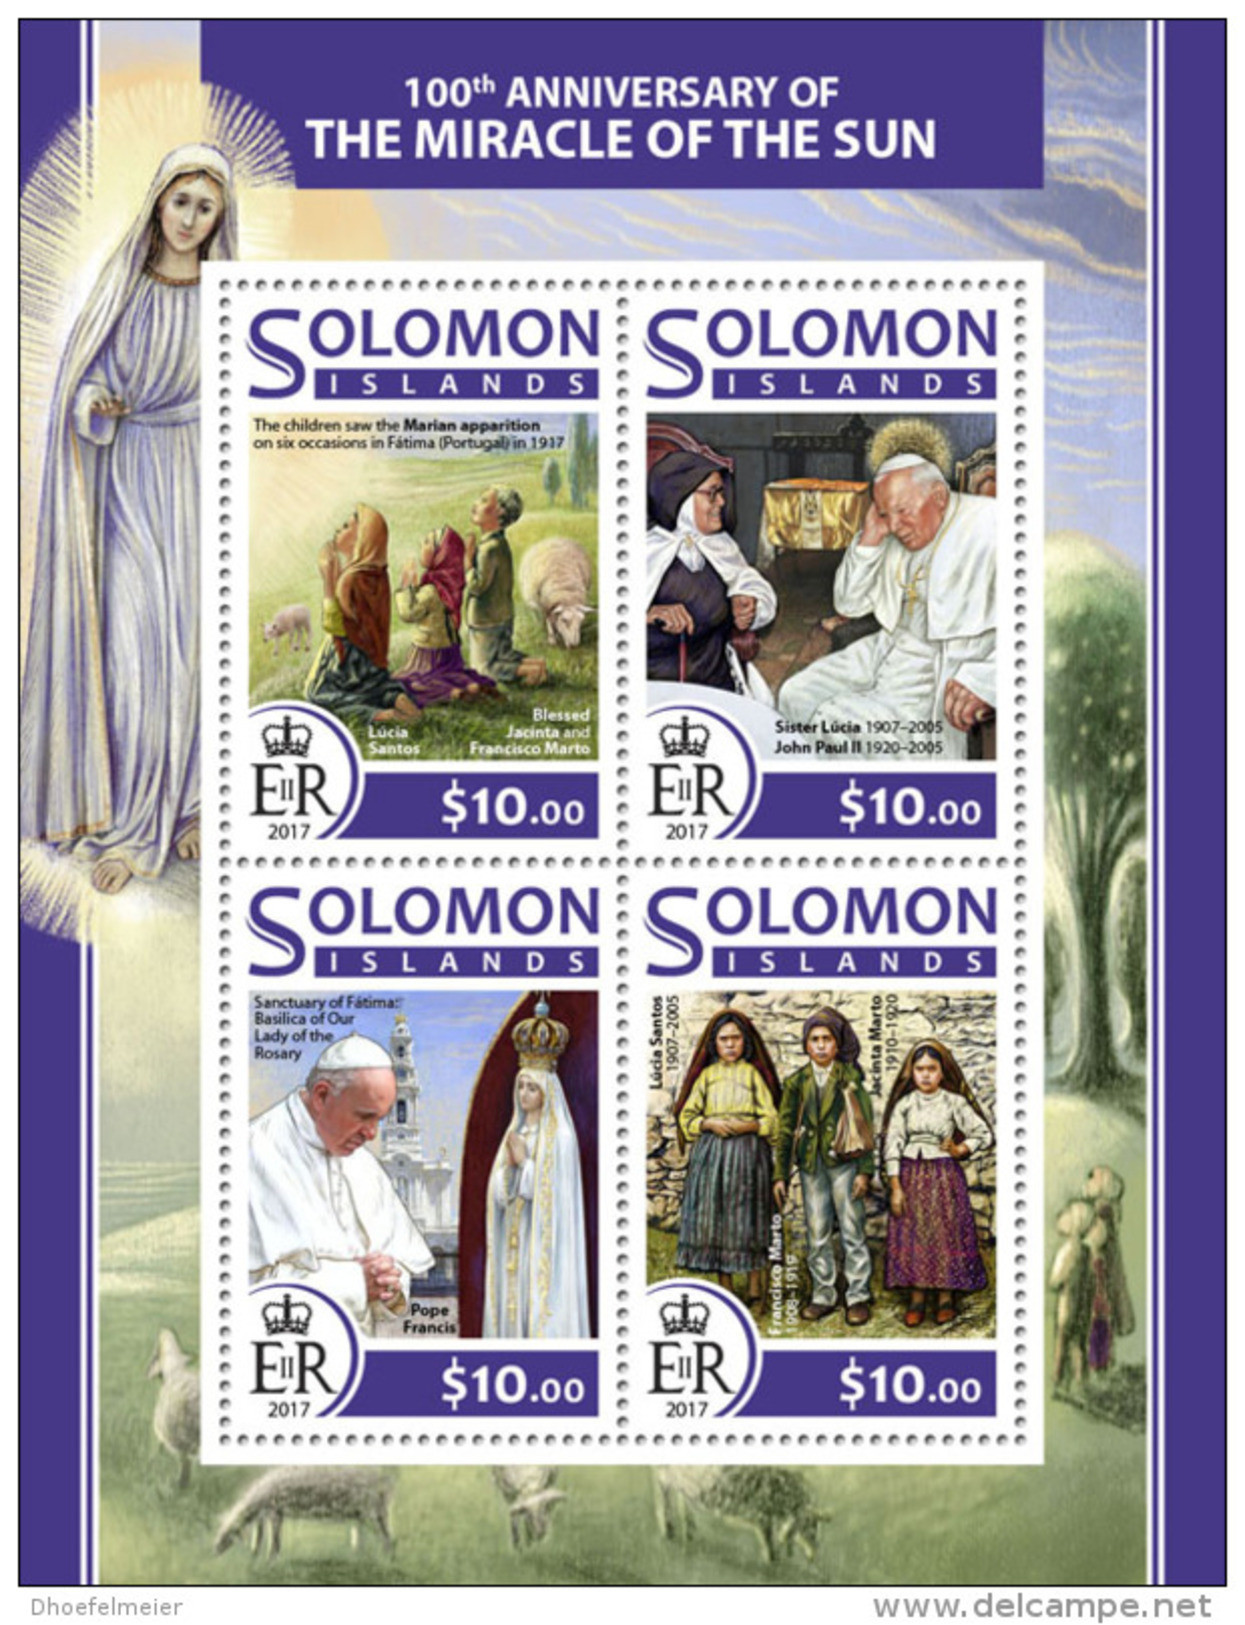 SOLOMON ISLANDS 2017 ** Miracle Of The Sun Sonnenwunder Fatima Miracle Du Soleil M/S - OFFICIAL ISSUE - DH1724 - Christentum